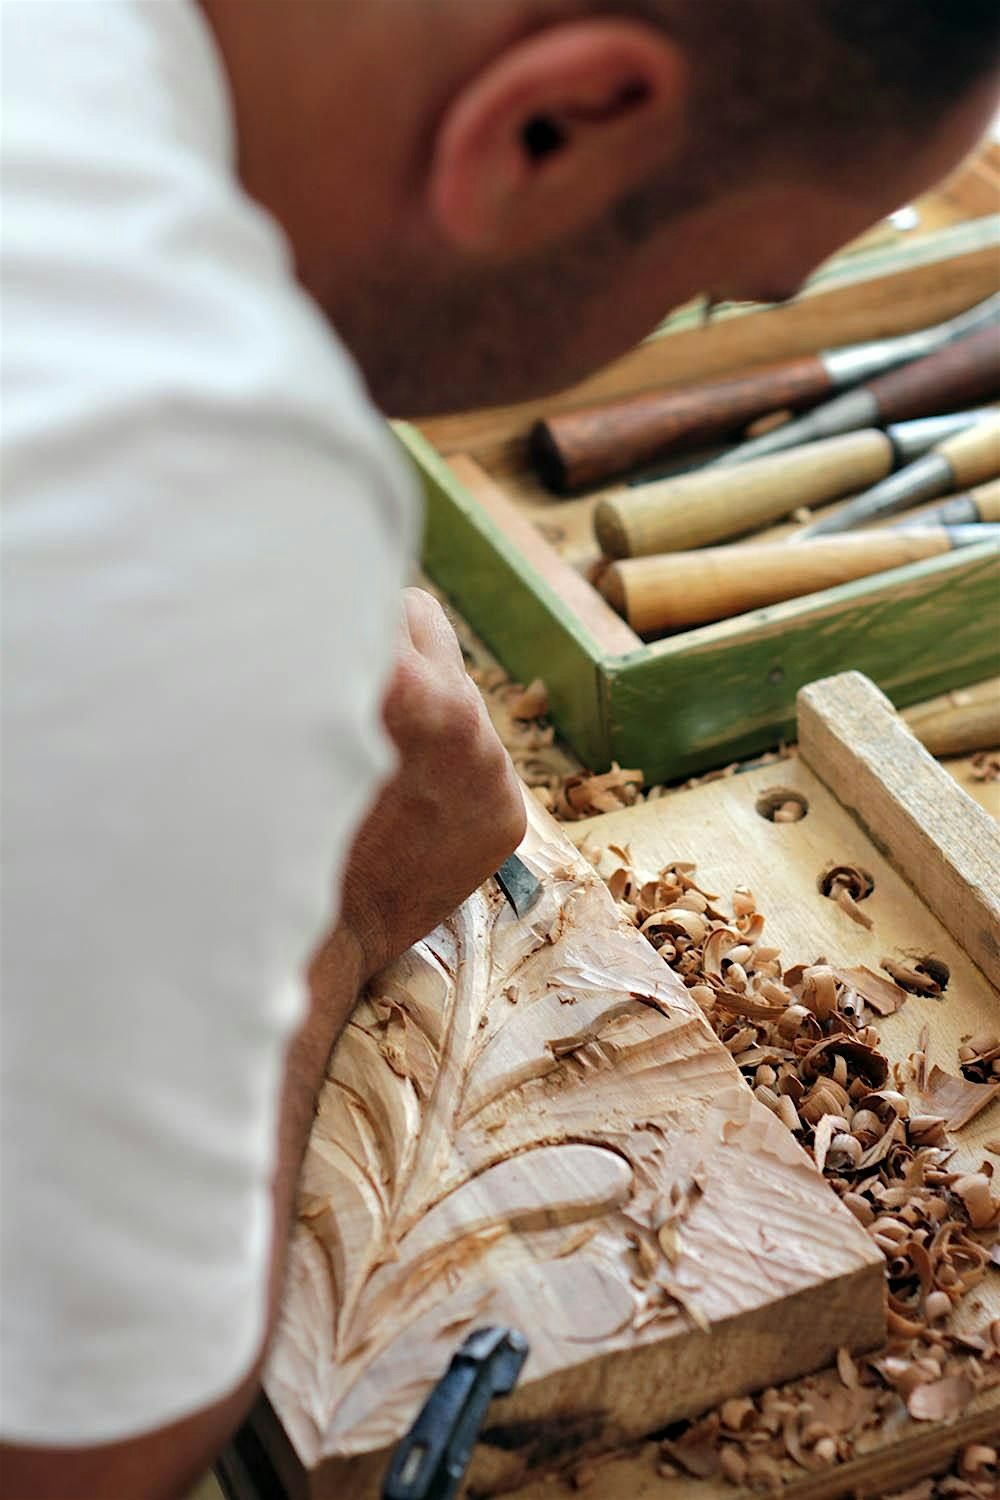 Woodworking for bereaved Dads - July session